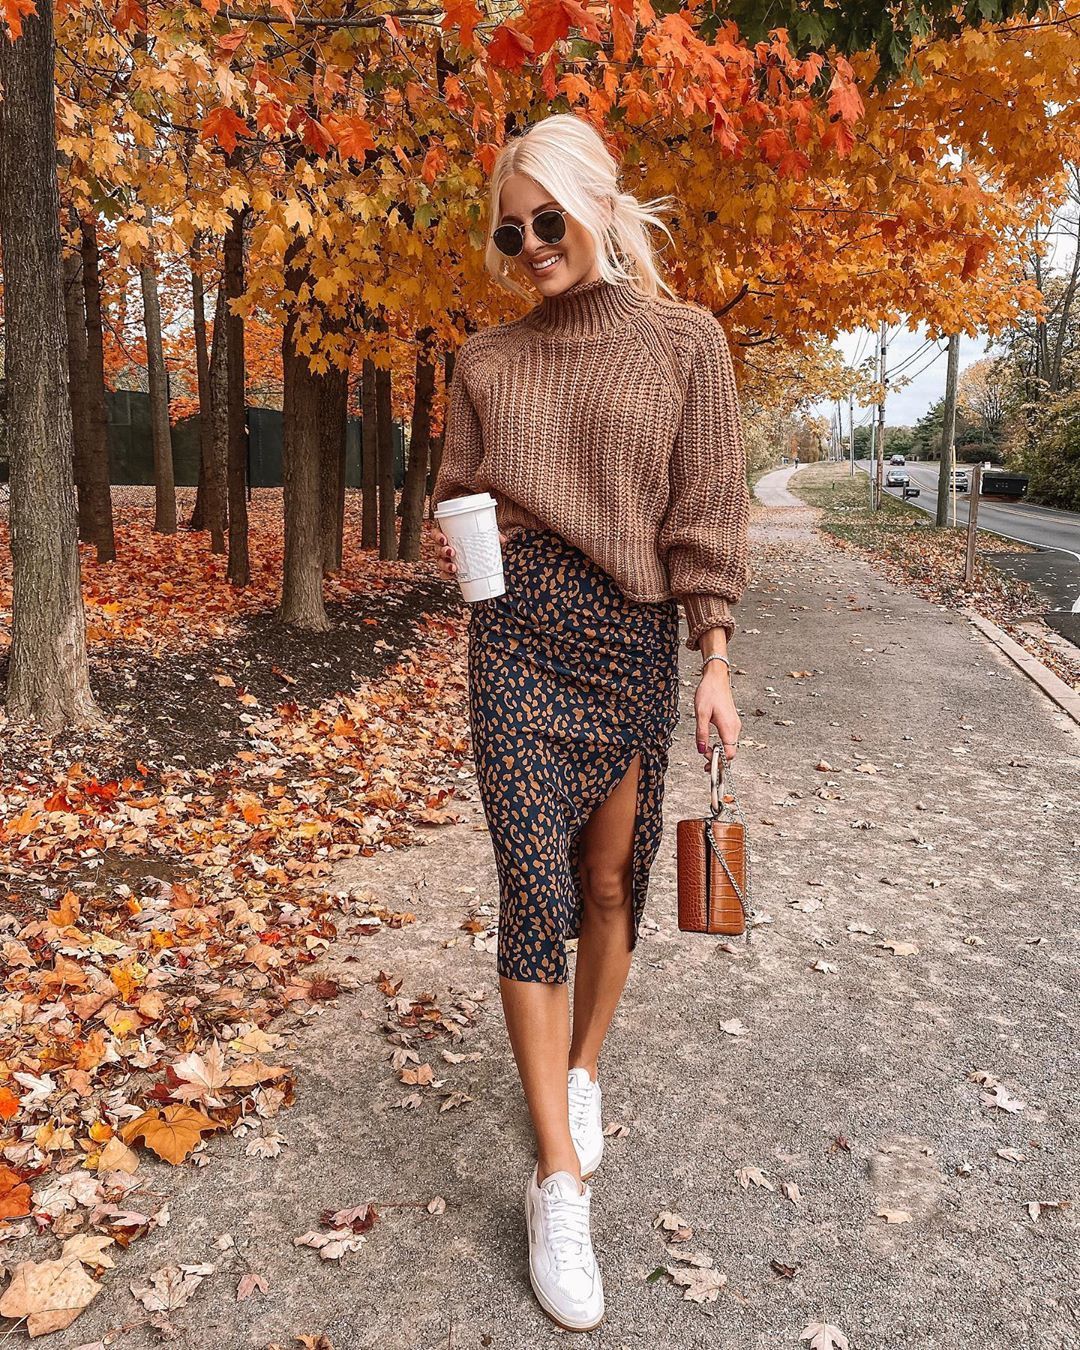 Kathleen Post on Instagram: “Wishing these leaves would stay forever 🍁🍂 Midi skirt & sneaks is still one of my fave combos 👉🏼 linked on the LTK app and via the link in…”